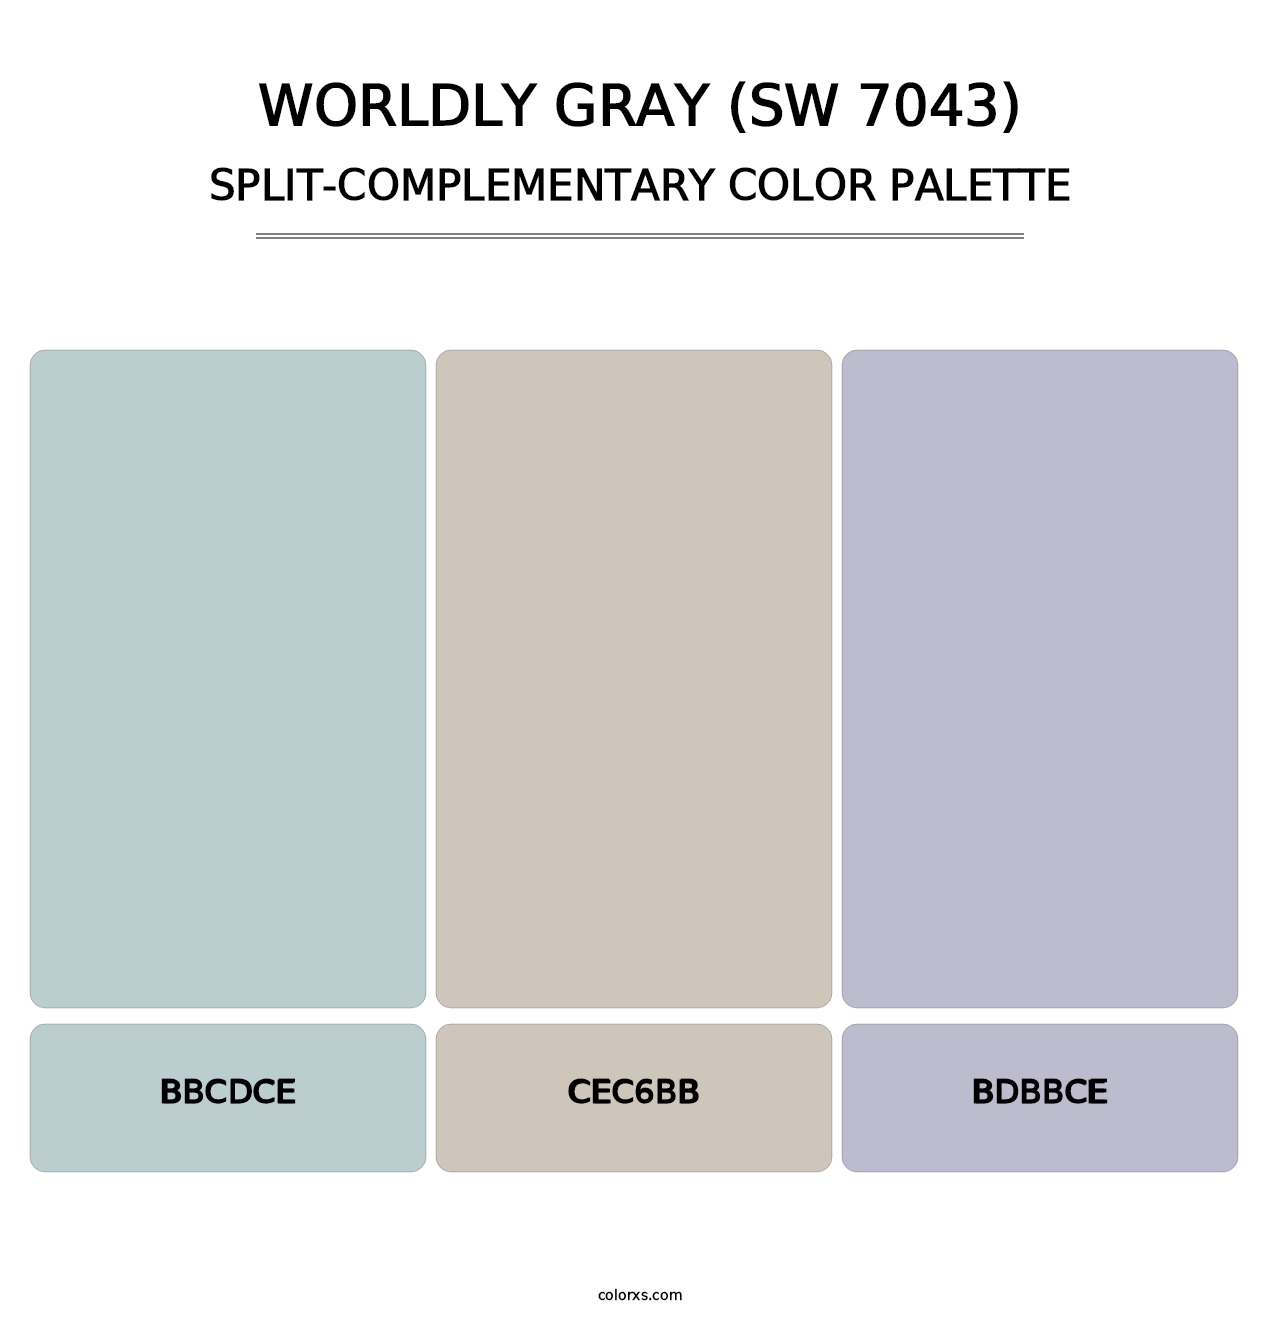 Worldly Gray (SW 7043) - Split-Complementary Color Palette